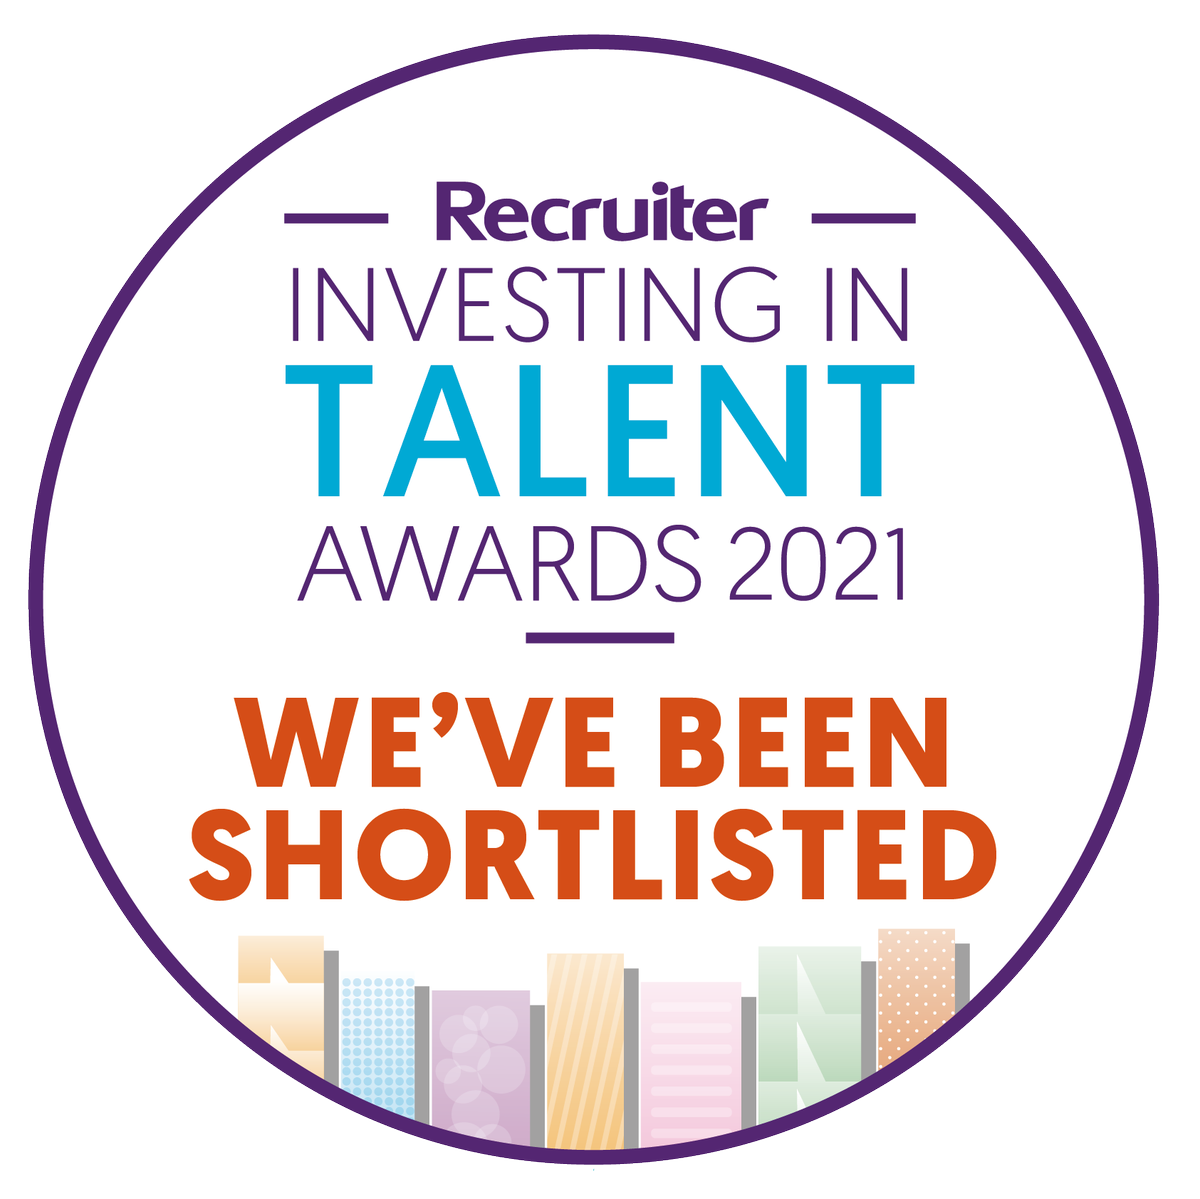 Investing in Talent Awards